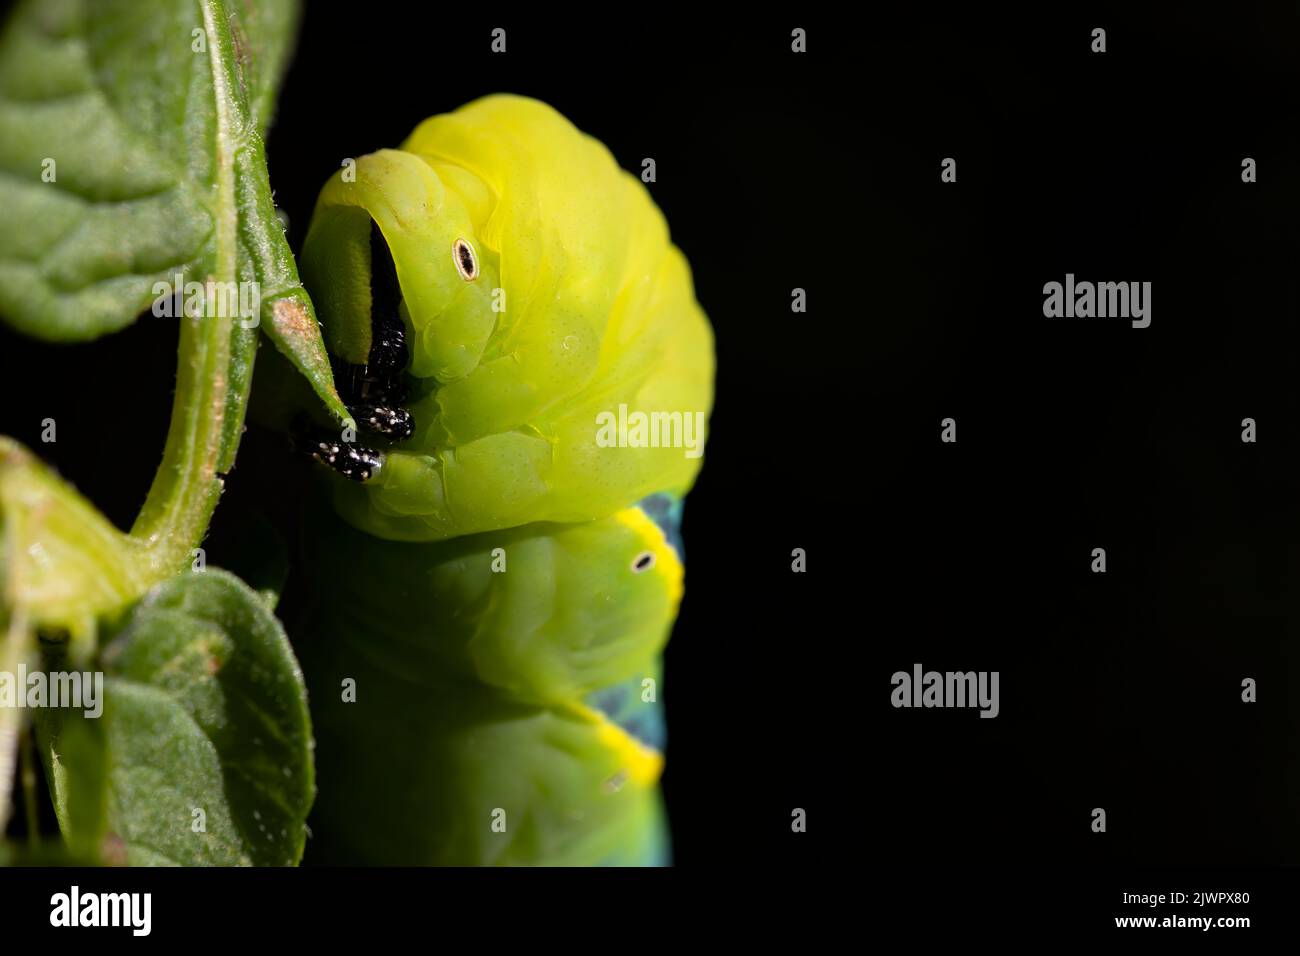 side view of an adult acherontia atropos caterpillar on a branch of a potato plant with dark background. nature photography. Copy space. Stock Photo